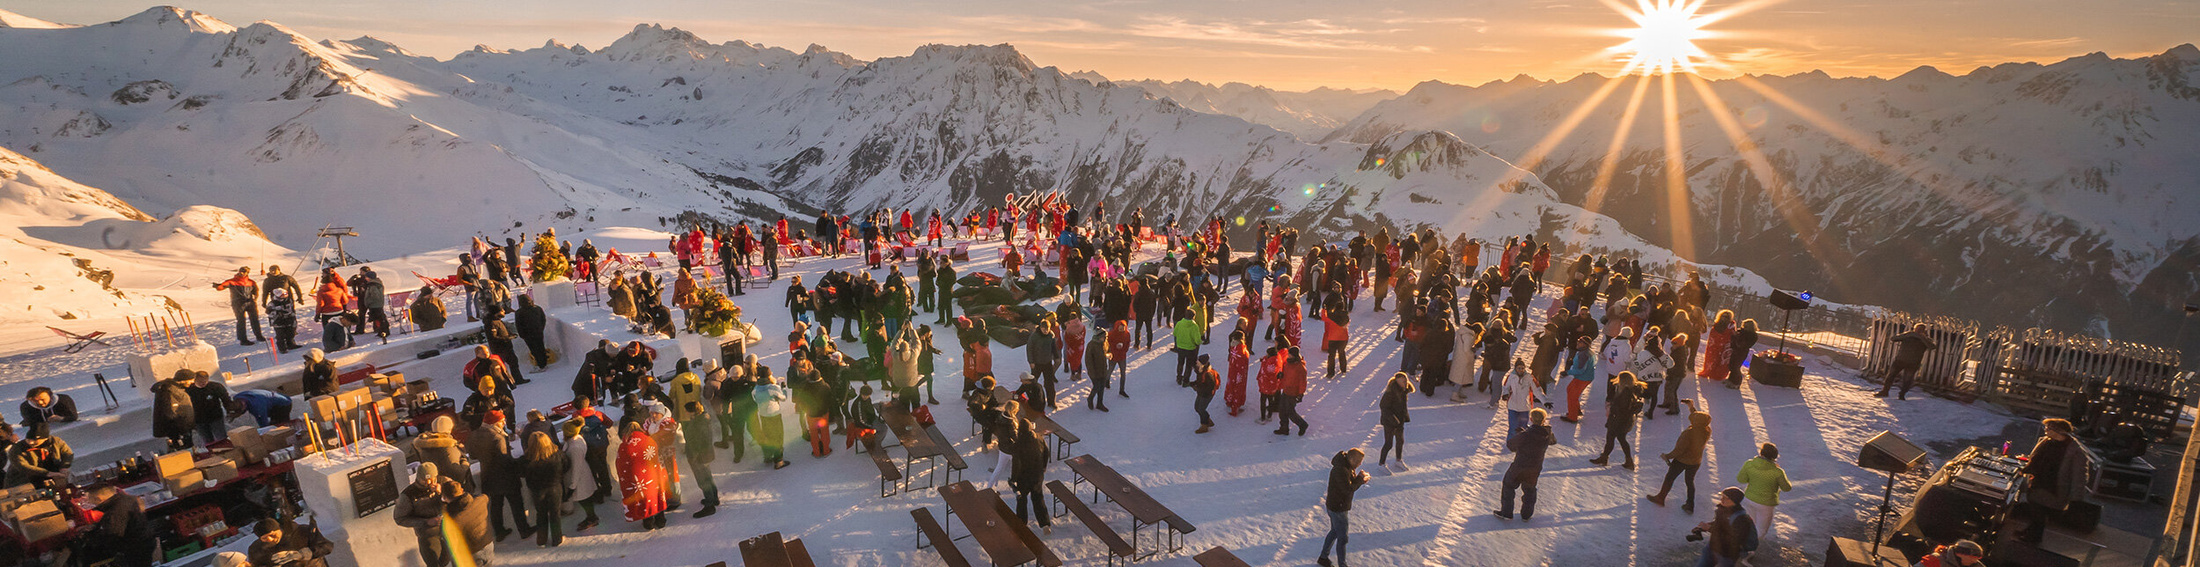 Events Ischgl Events